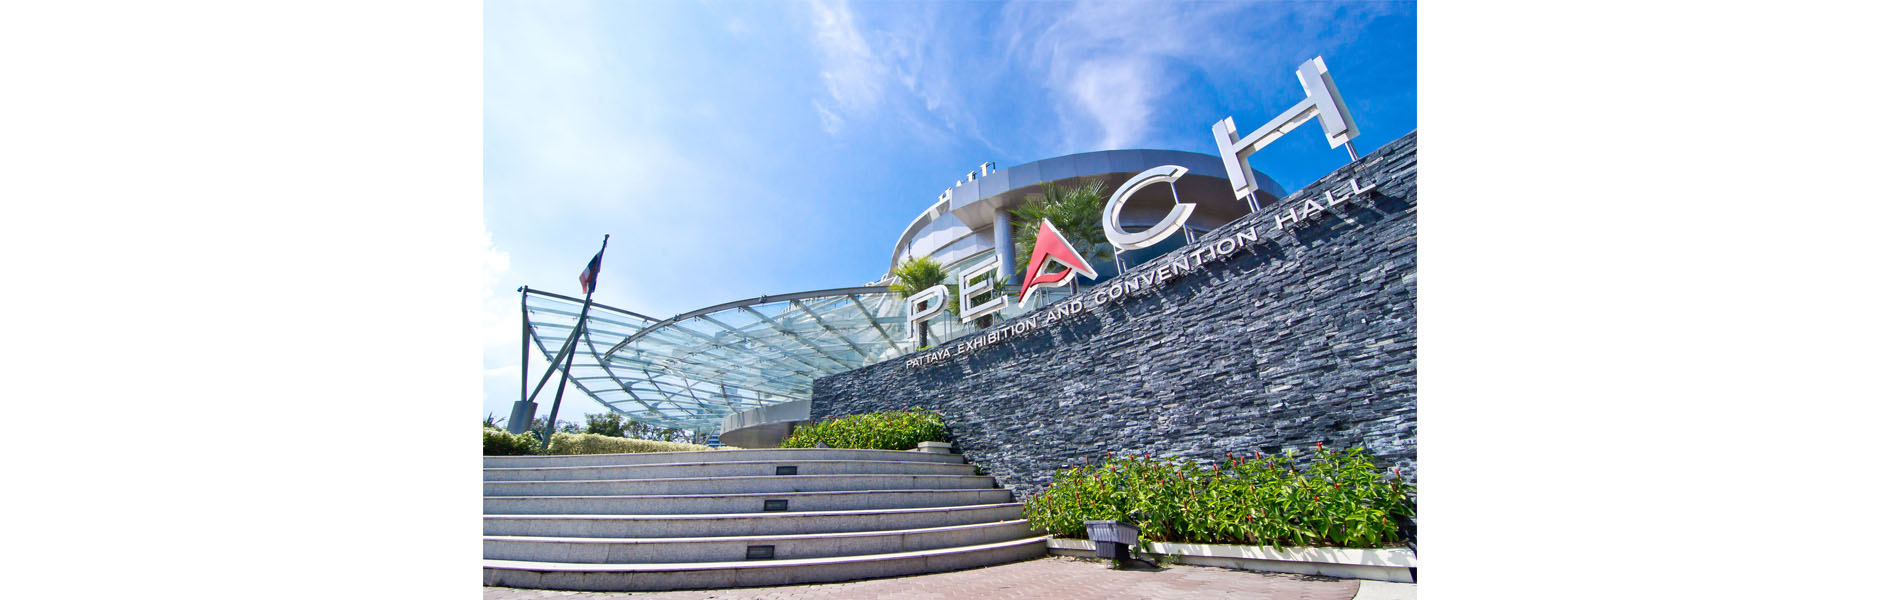 PATTAYA EXHIBITION AND CONVENTION HALL (PEACH)